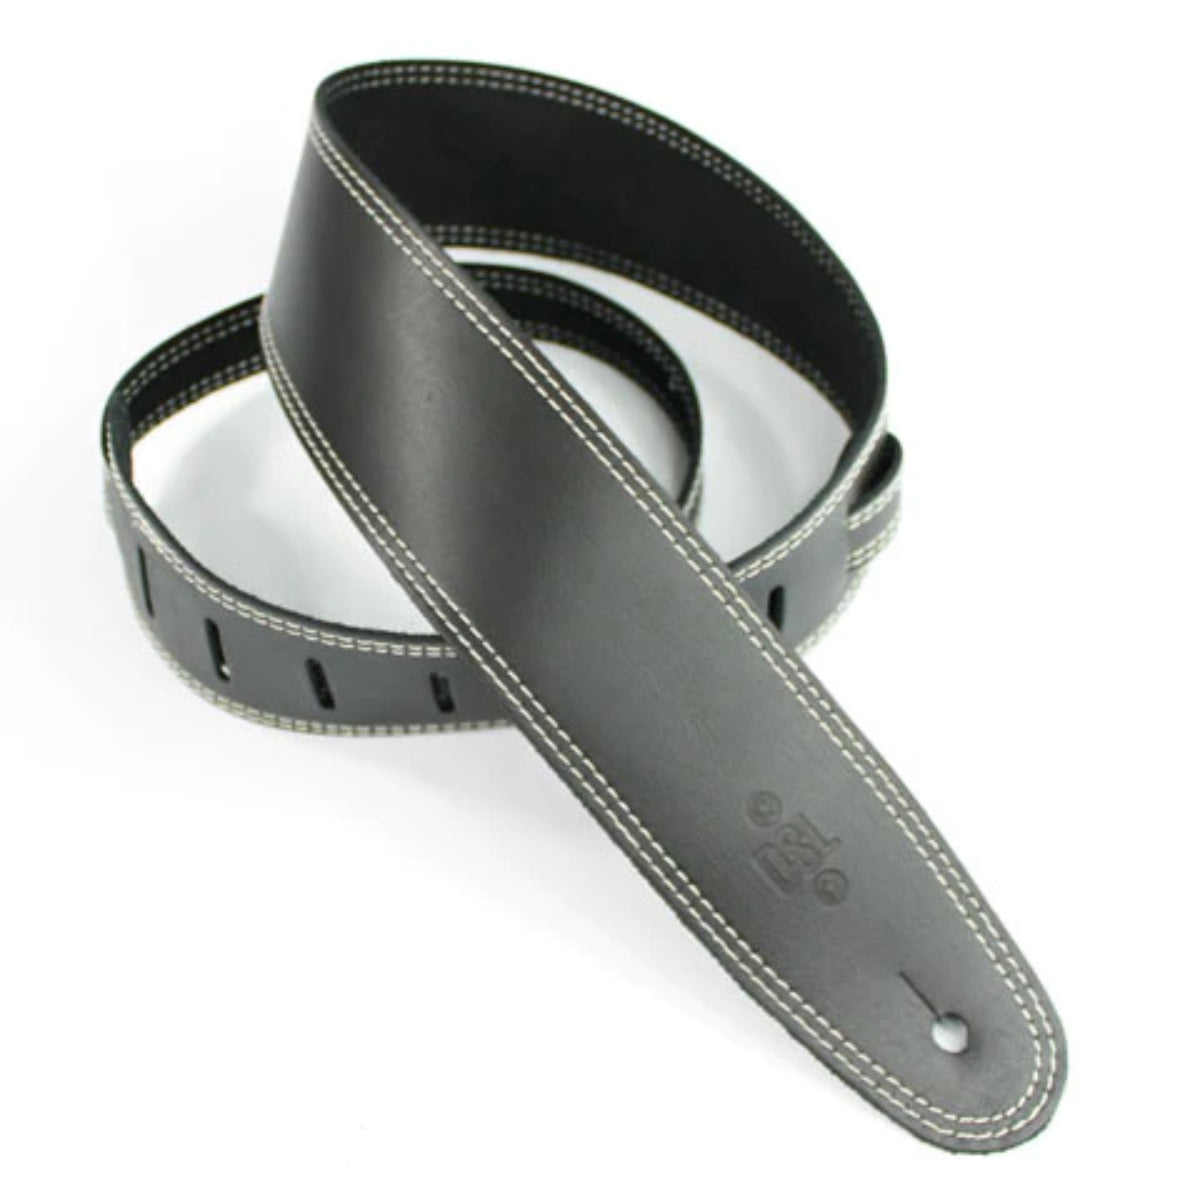 SGE25-15-3 2.5" Leather Strap, Black With Beige